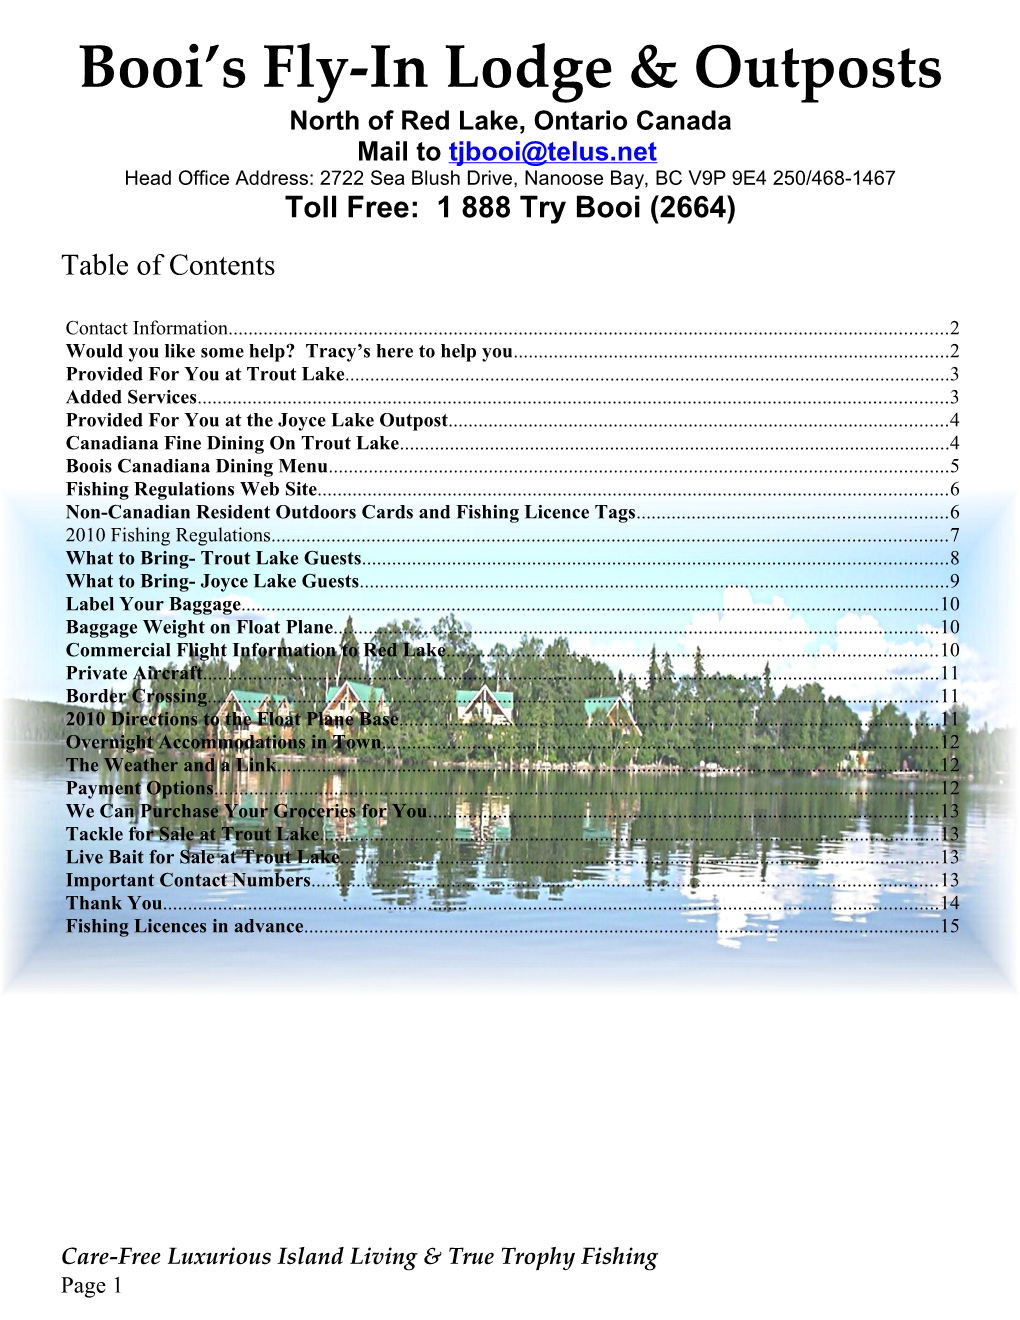 Table of Contents s215